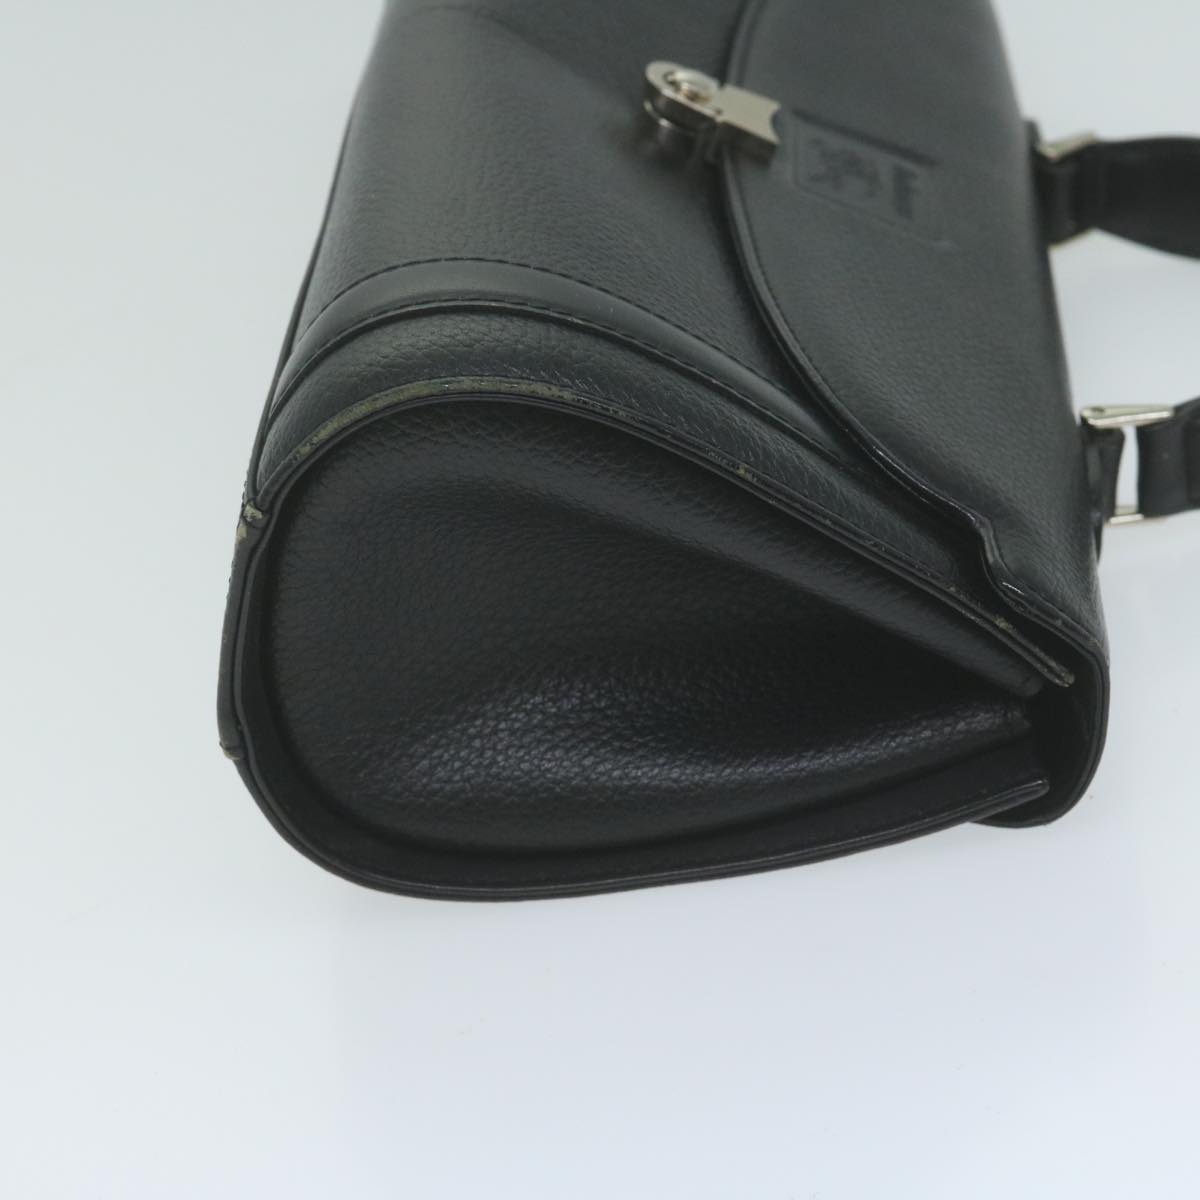 Burberrys Hand Bag Leather Black Auth 65918